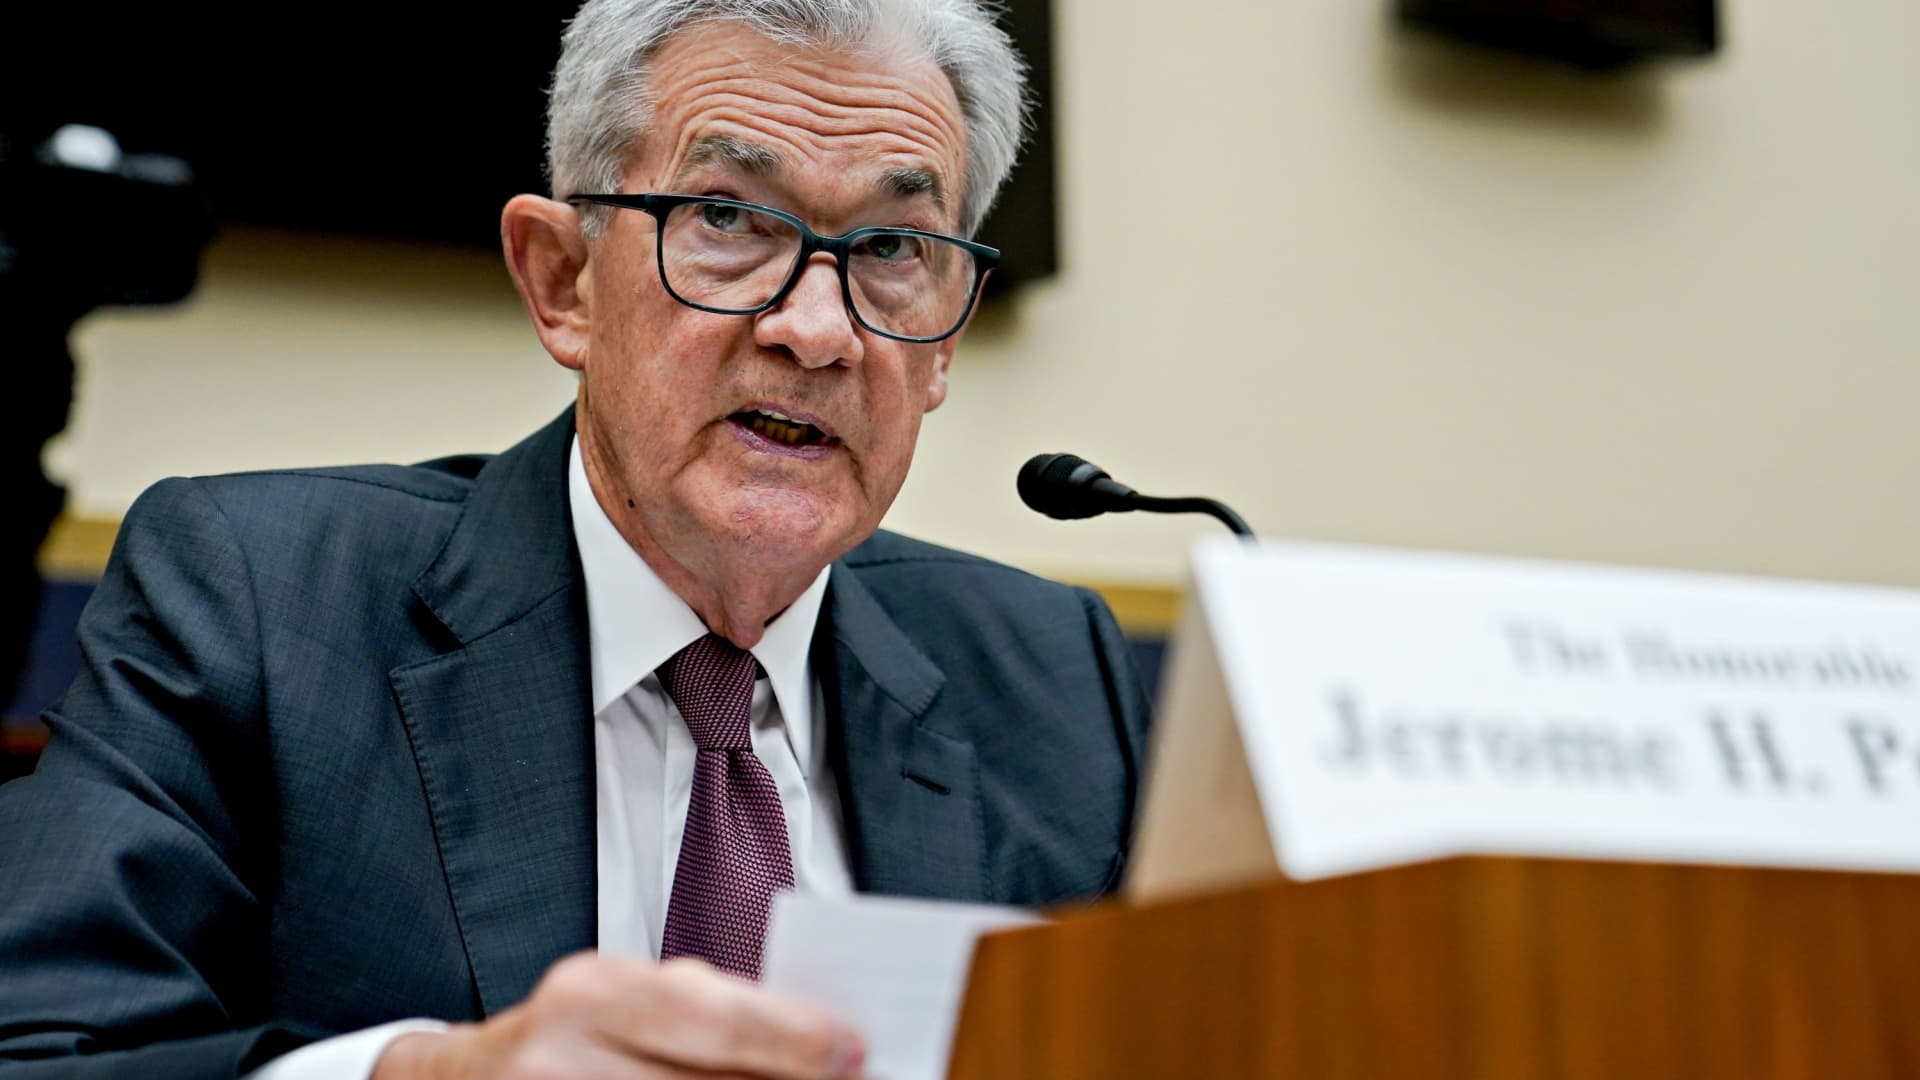 Powell expects more Fed rate hikes ahead as inflation fight ‘has a long way to go’